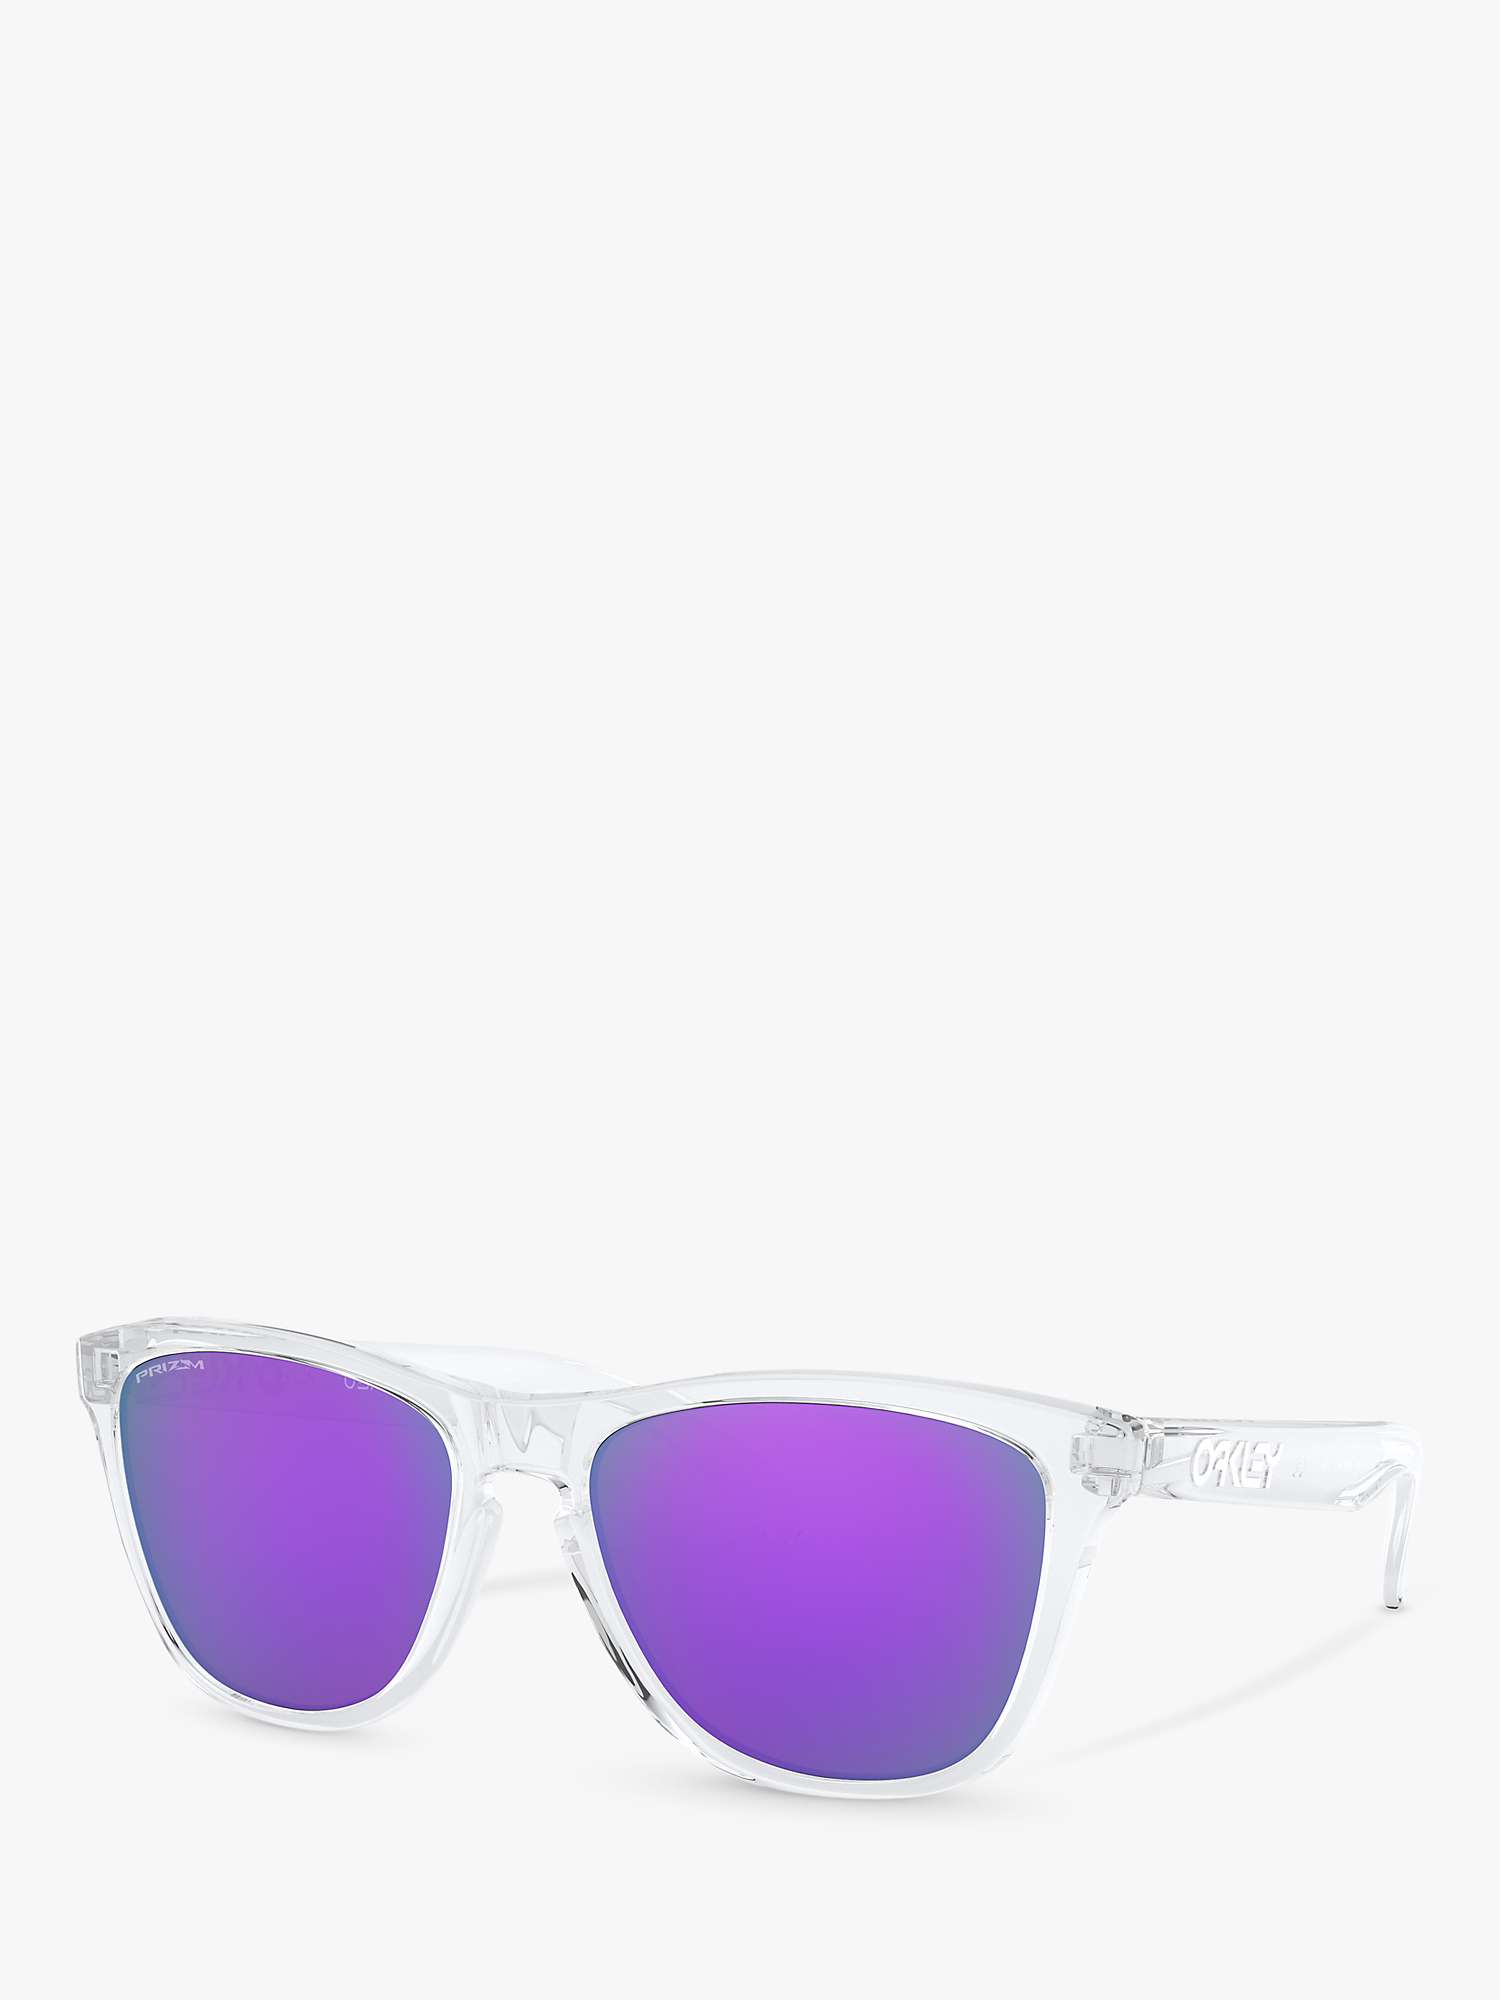 Buy Oakley OO9013 Men's Frogskins Prizm Square Sunglasses, Clear/Mirror Purple Online at johnlewis.com